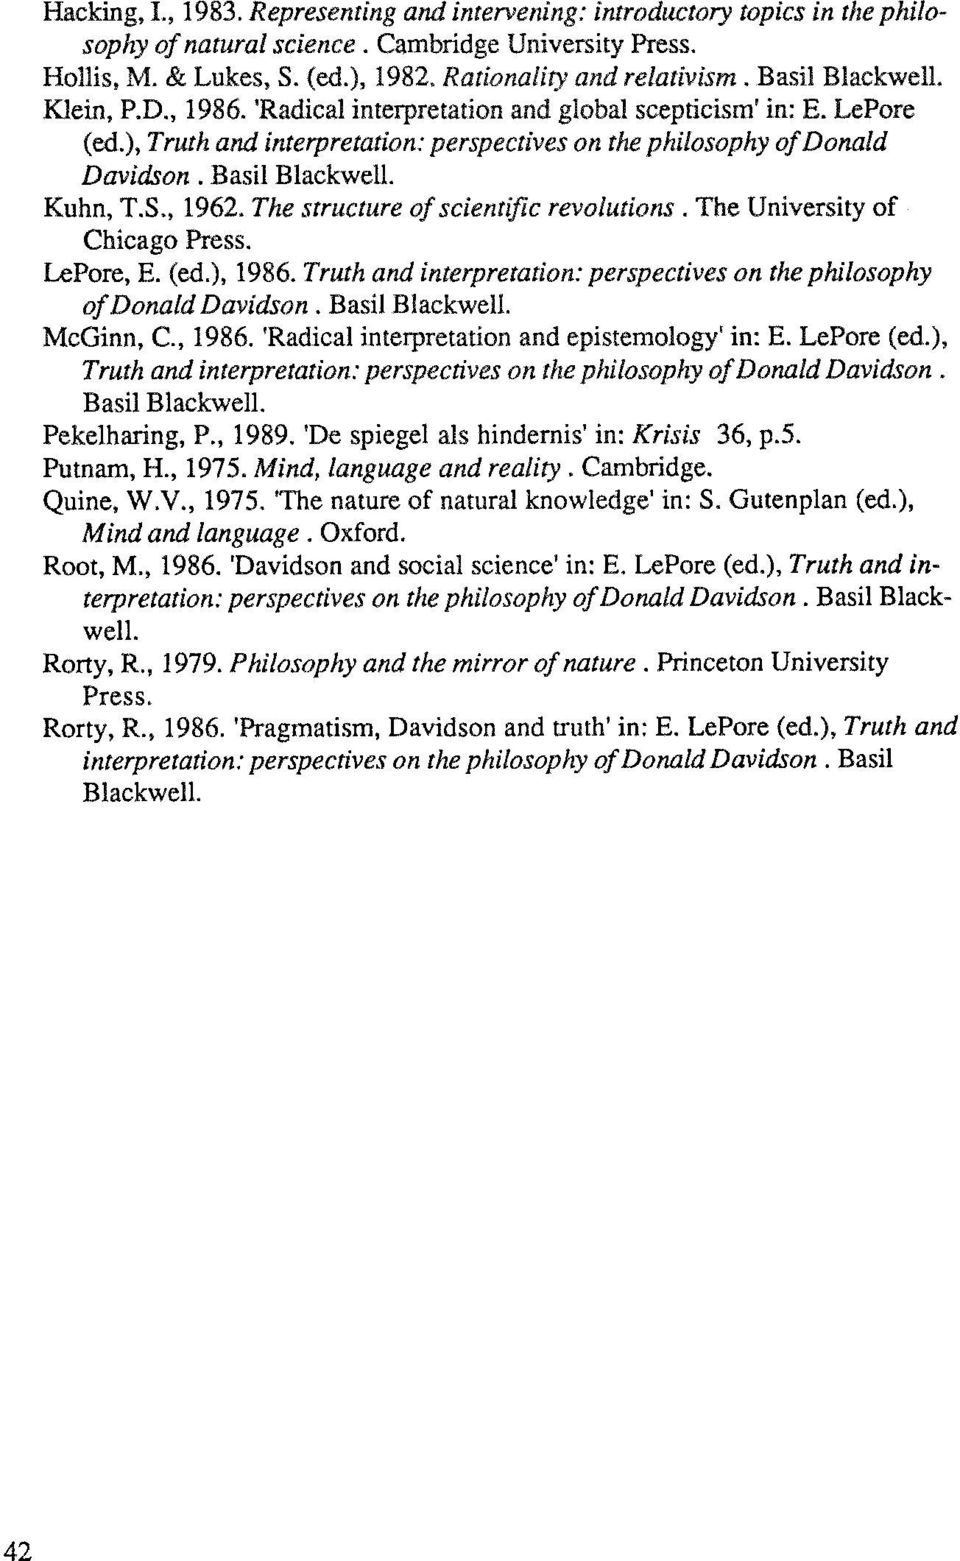 Kuhn, T.S., 1962. The structure of scientific revolutions. The University of Chicago Press. LePore, E. (ed.), 1986. Truth and interpretation: perspectives on the philosophy of Donald Davidson.